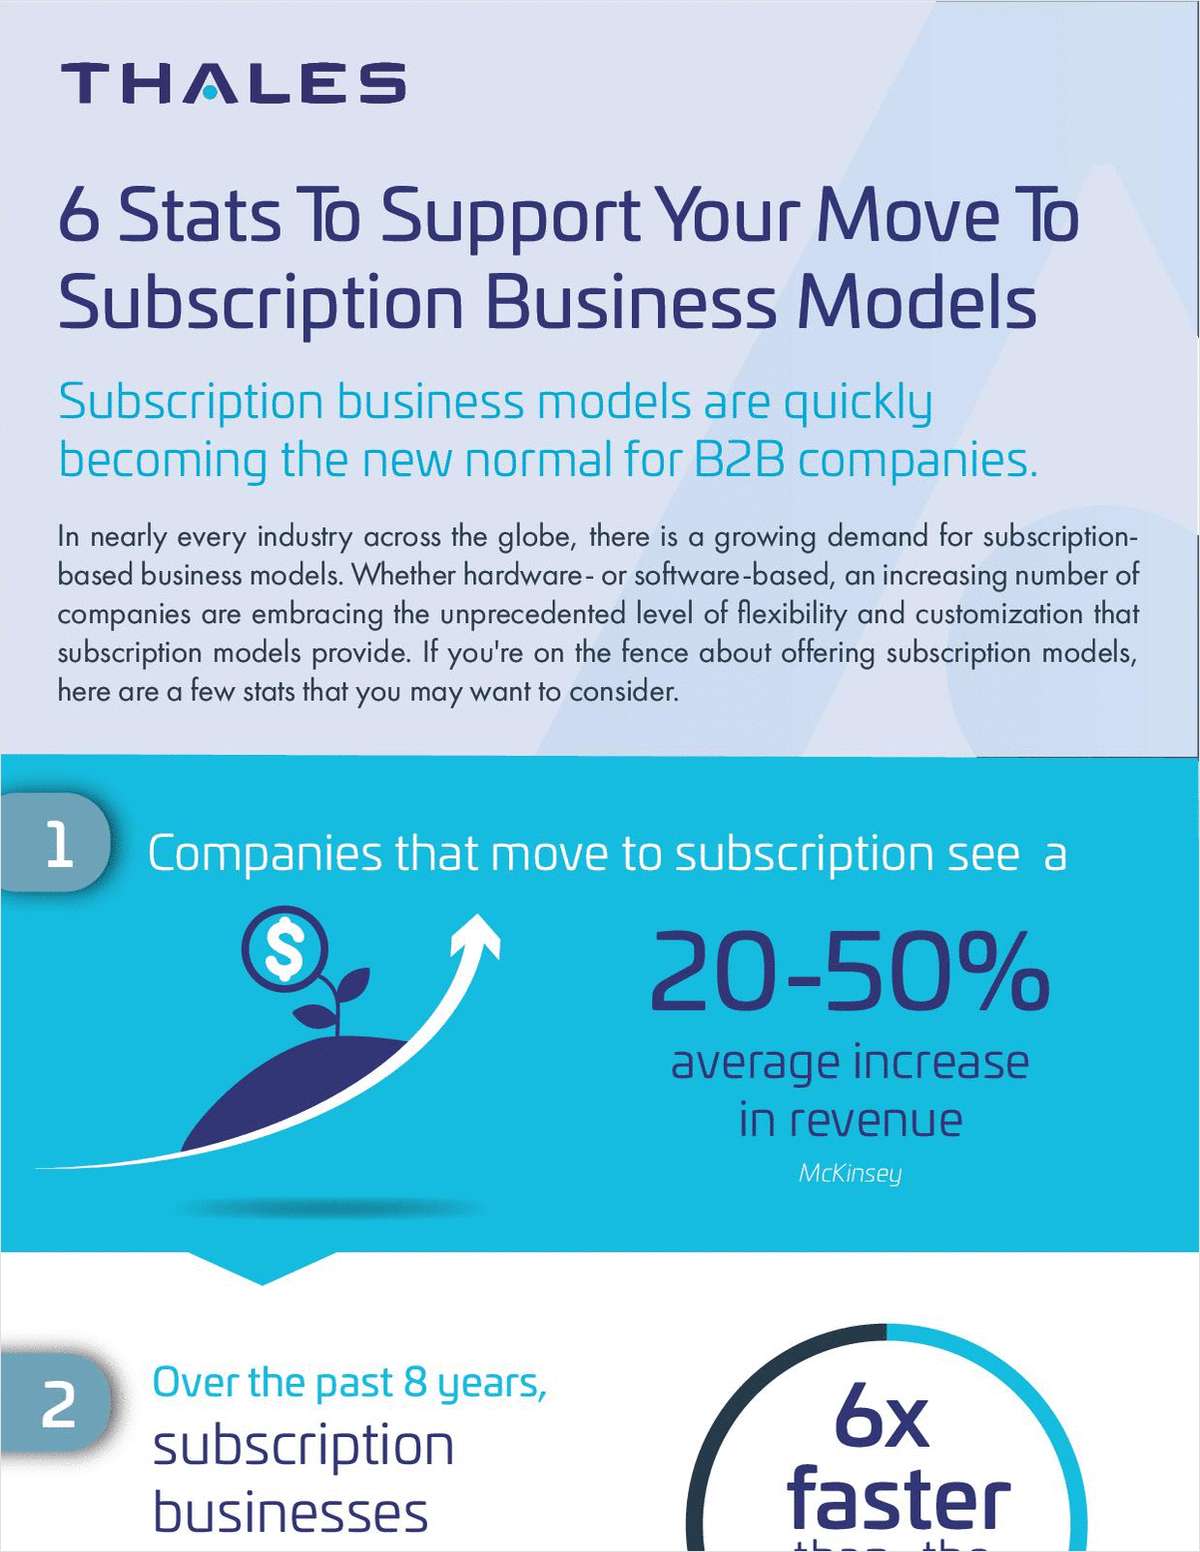 6 Stats To Support Your Move To Subscription Business Models